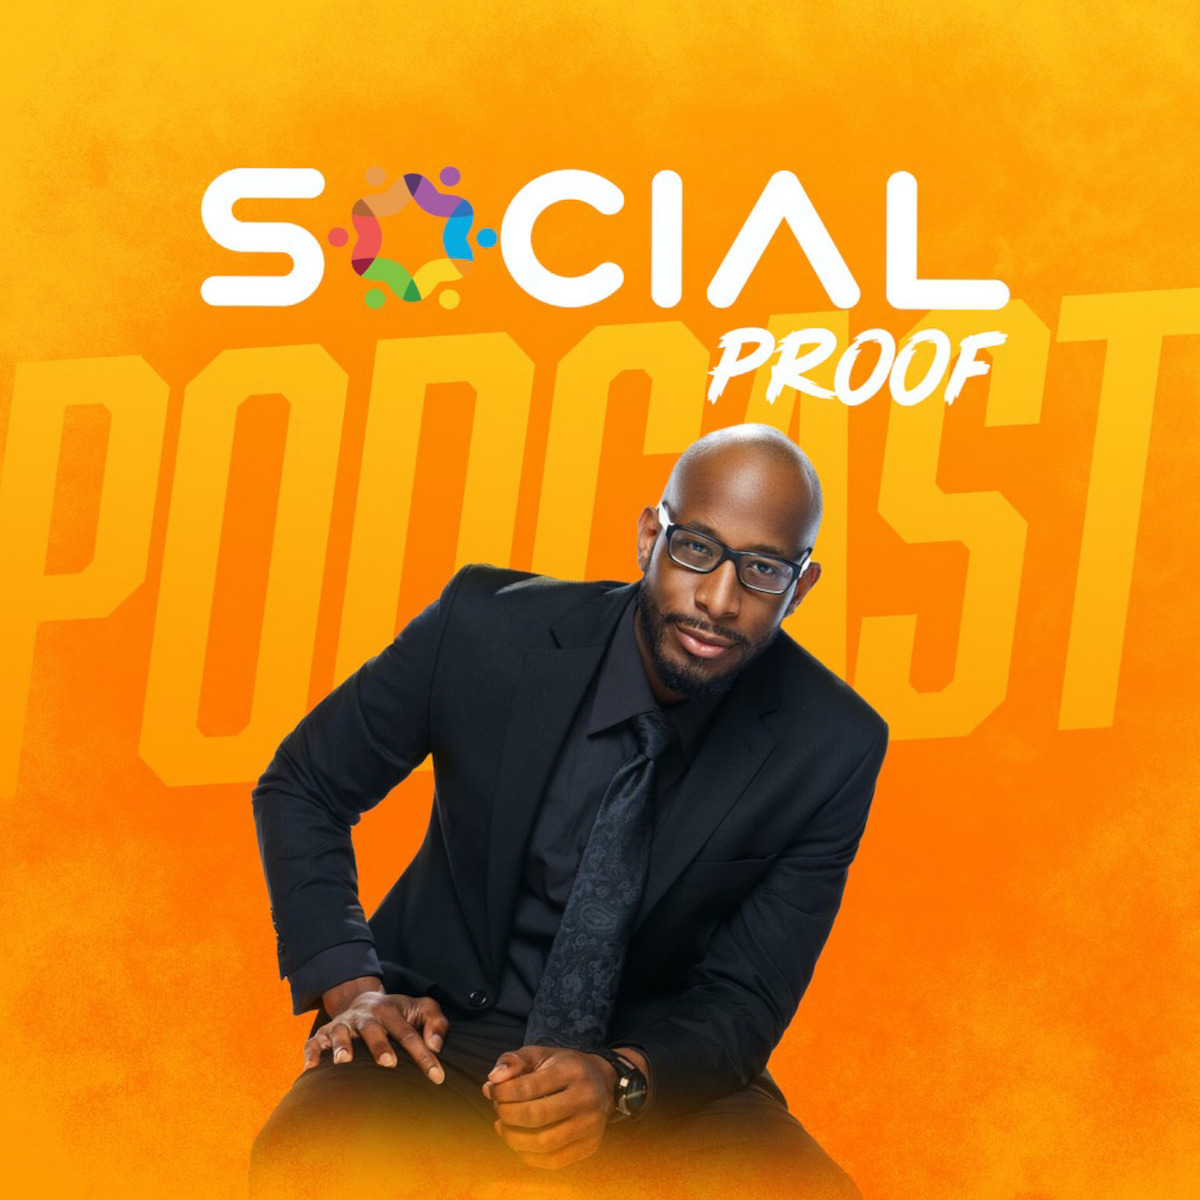 A committed community builder, David Shands is always looking for ways to bring like-minded people together. Check out his podcast "The Social Proof".